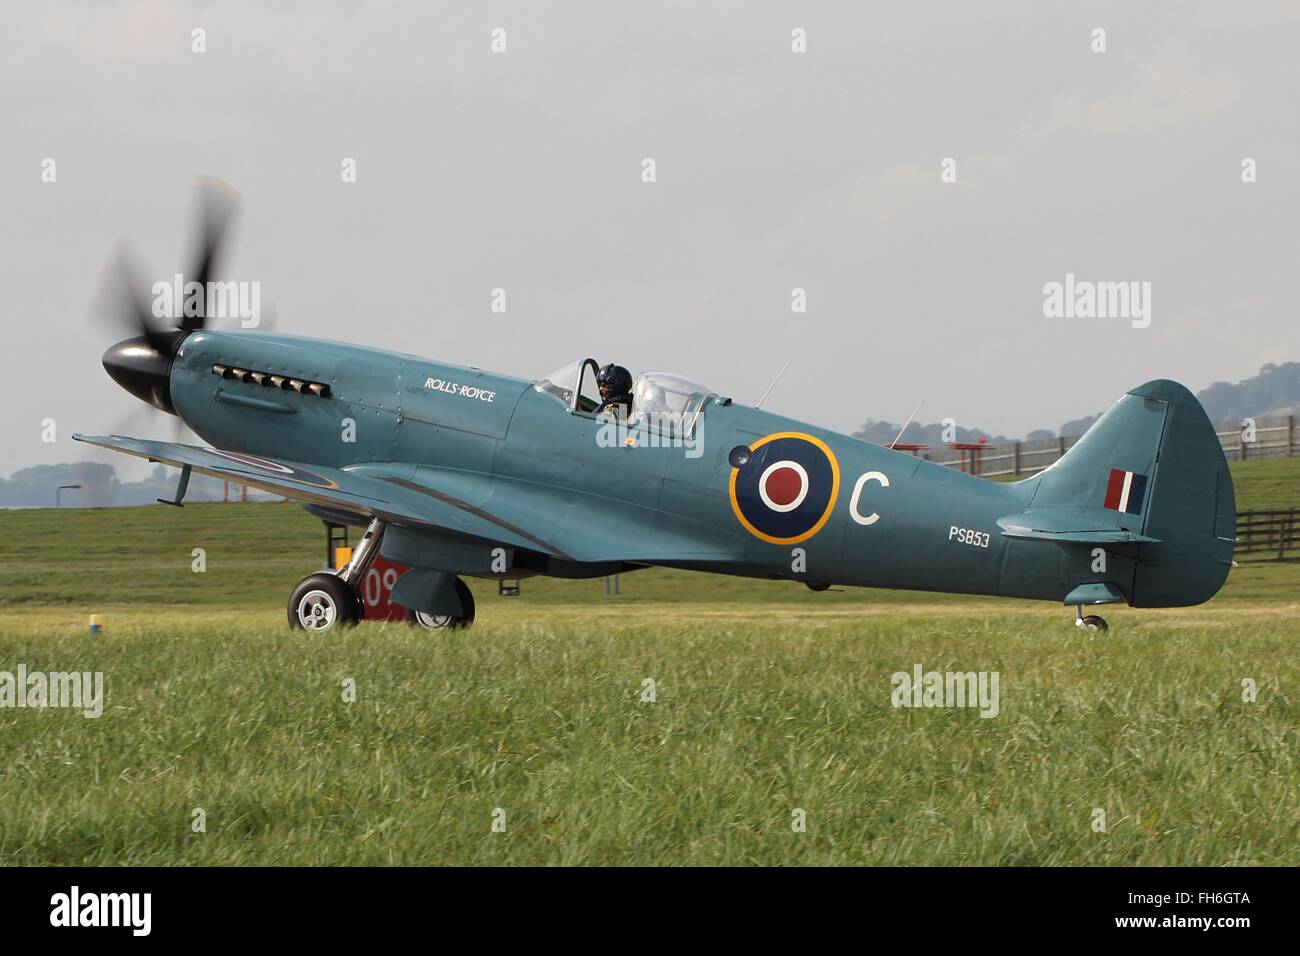 PS853 (G-RRGN), the Rolls Royce Spitfire PR.XIX, is seen as she taxis out to display at the RAF Leuchars Airshow in 2013. Stock Photo